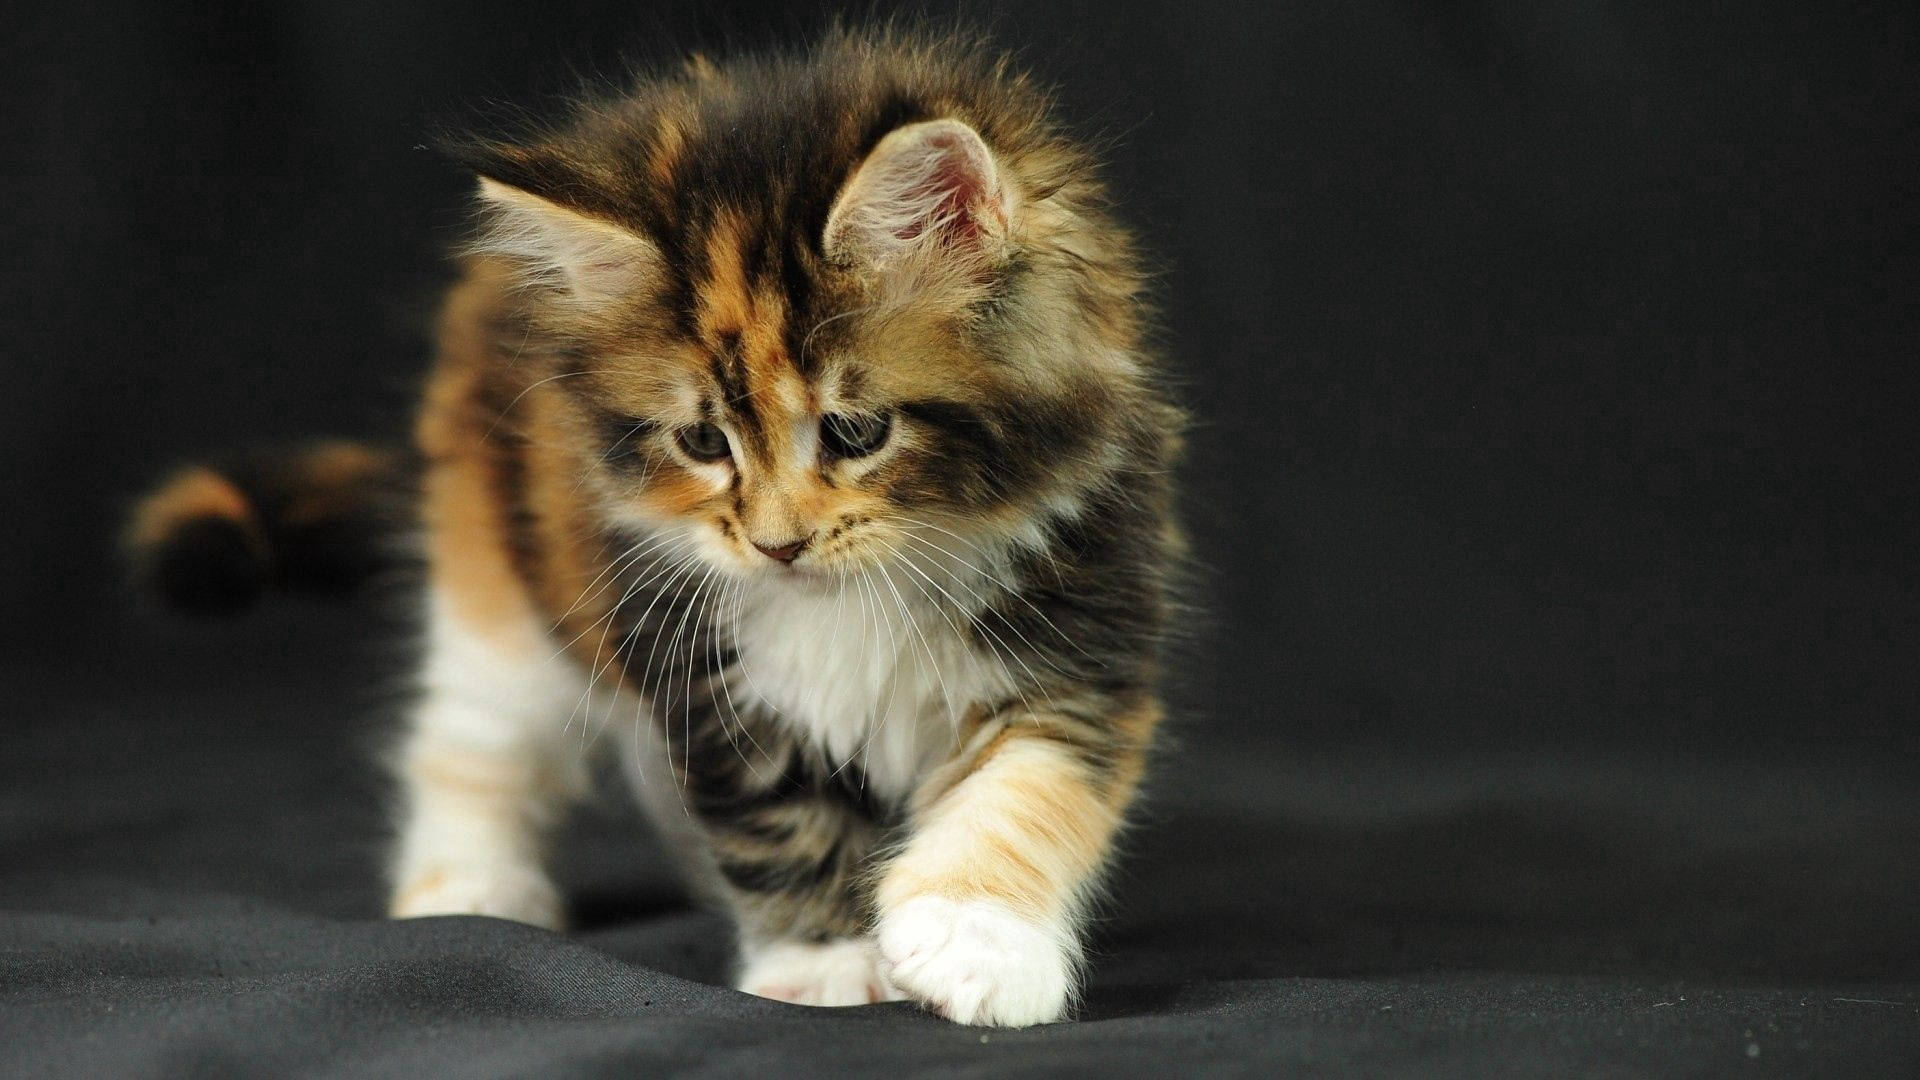 Cute fluffy kitten snuggling with its toy Wallpaper